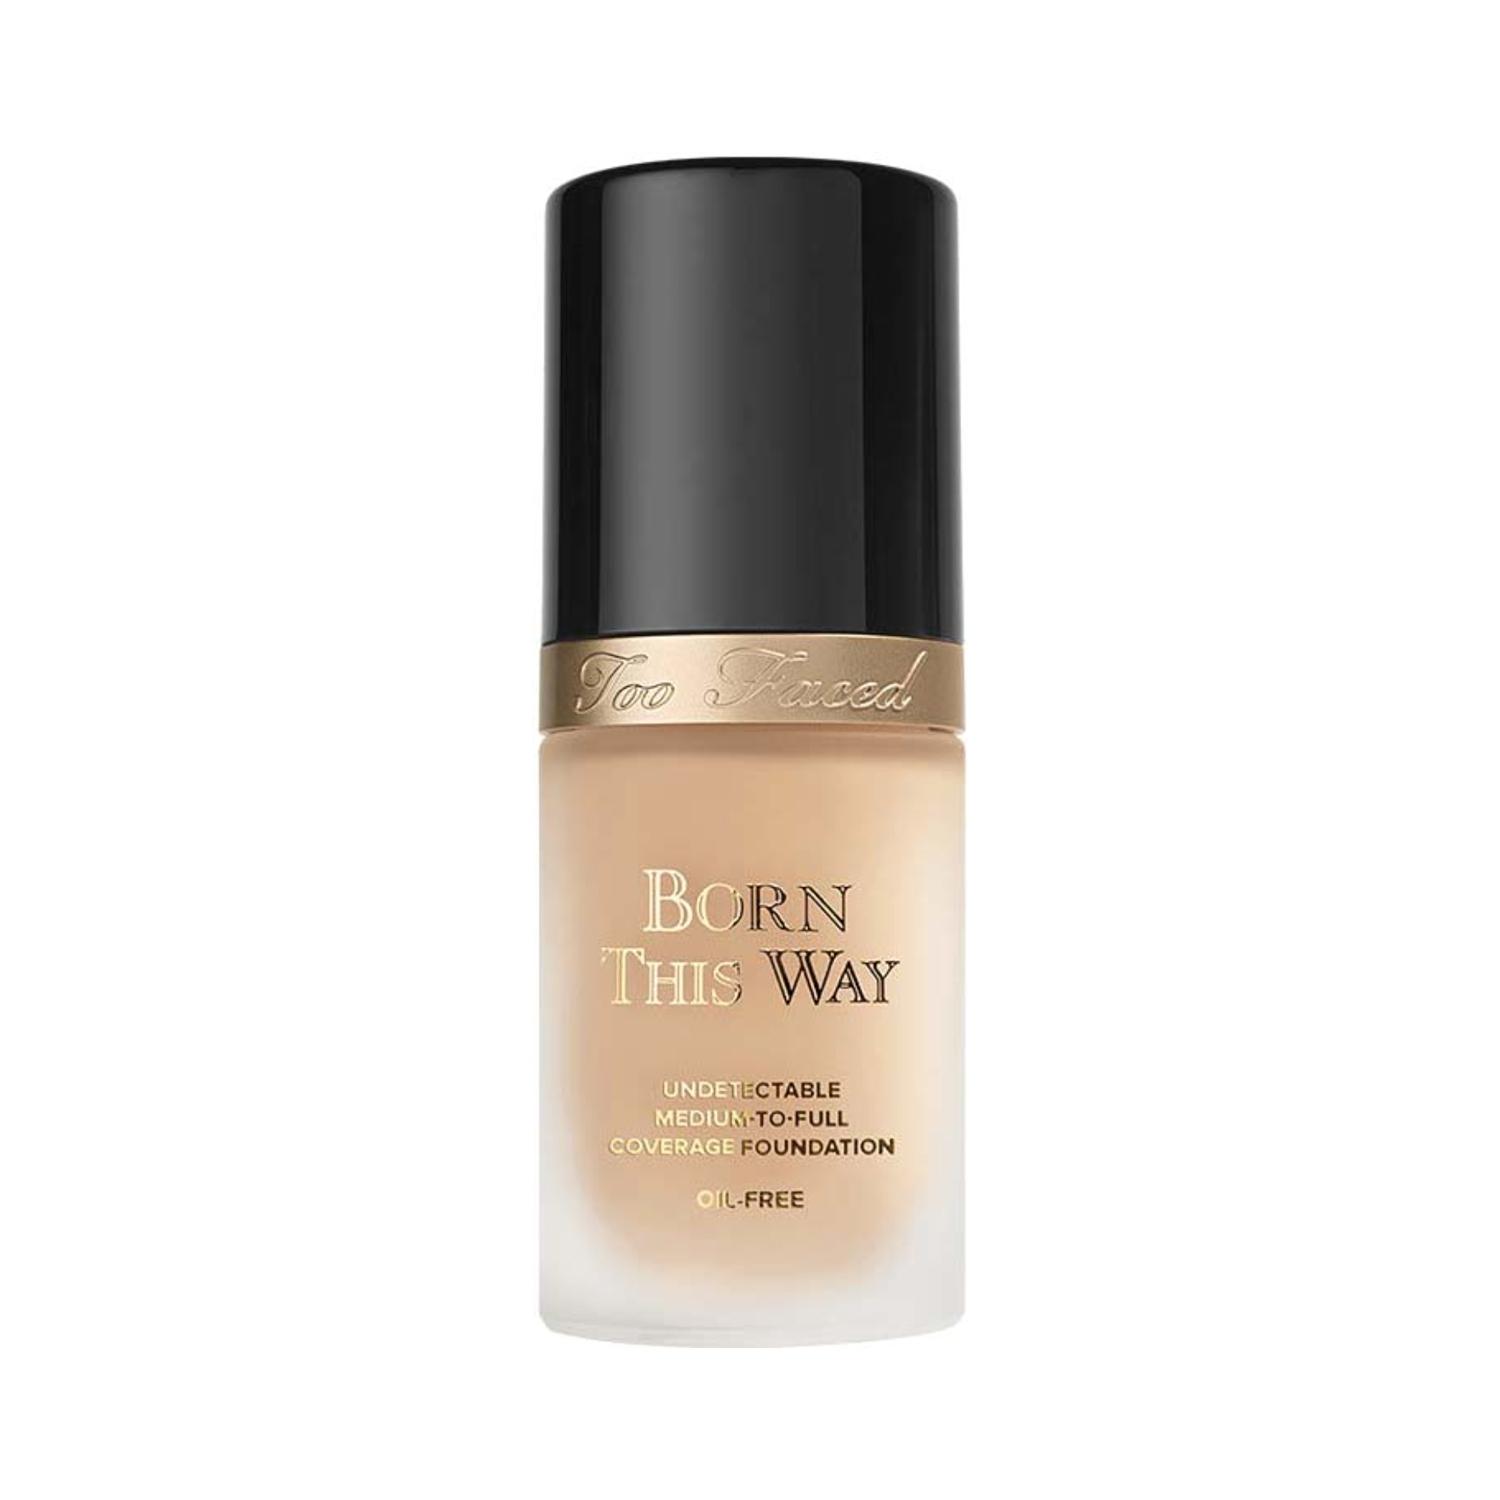 too faced born this way foundation - pearl (30ml)